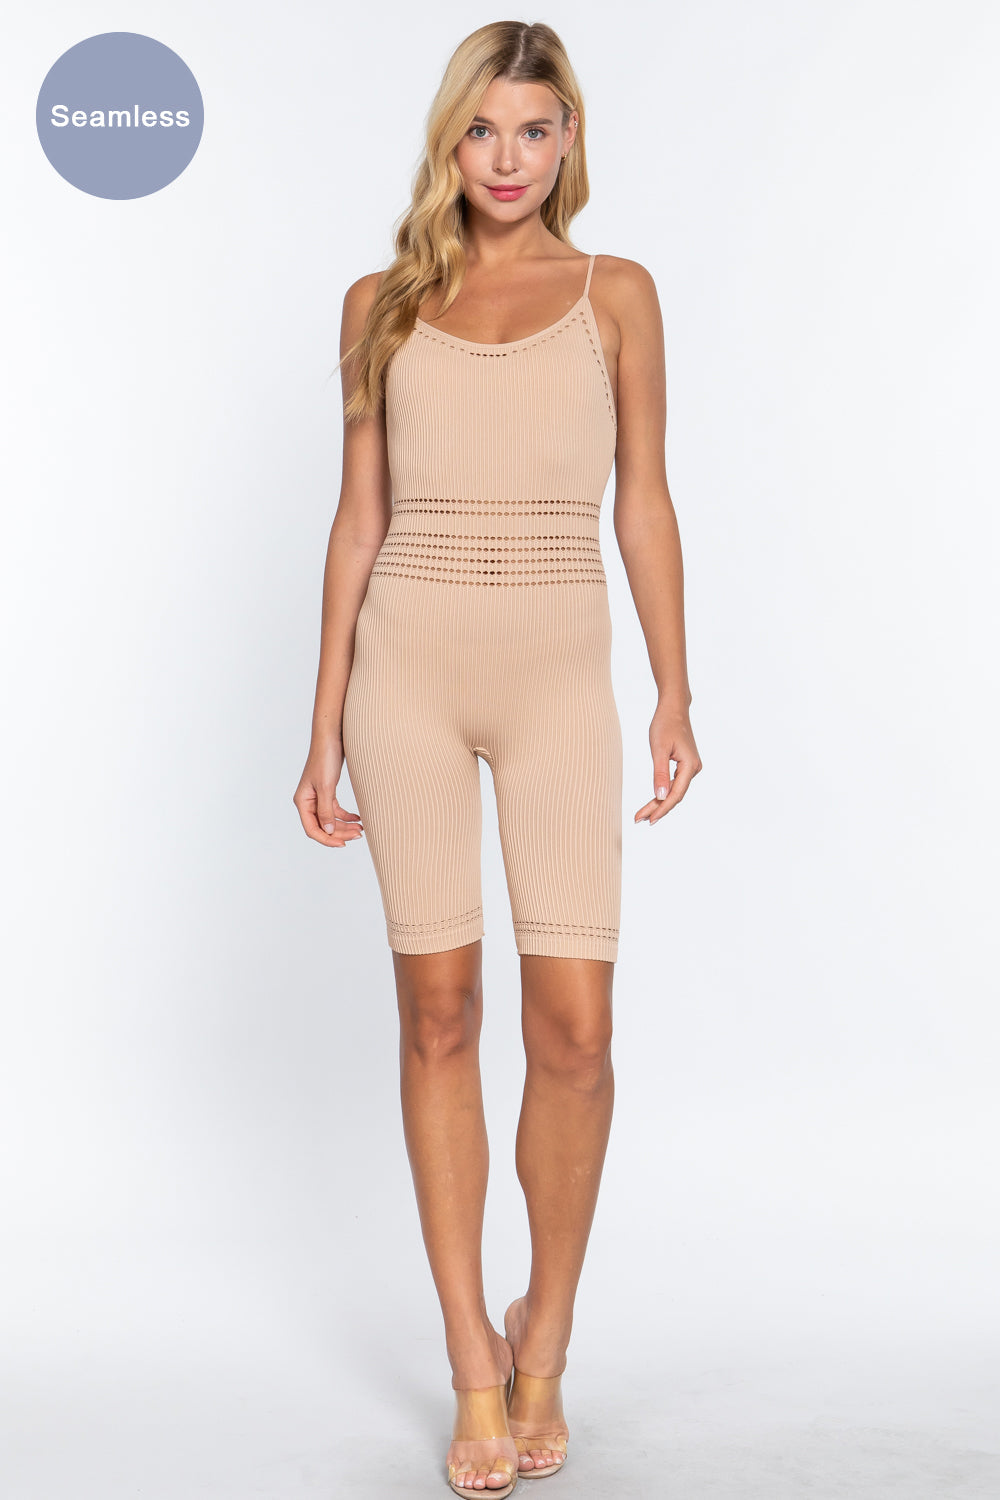 Round Neck Pointelle Detail Seamless Rib Bodycon Pink Beige Romper Jumpsuits & Rompers jehouze 